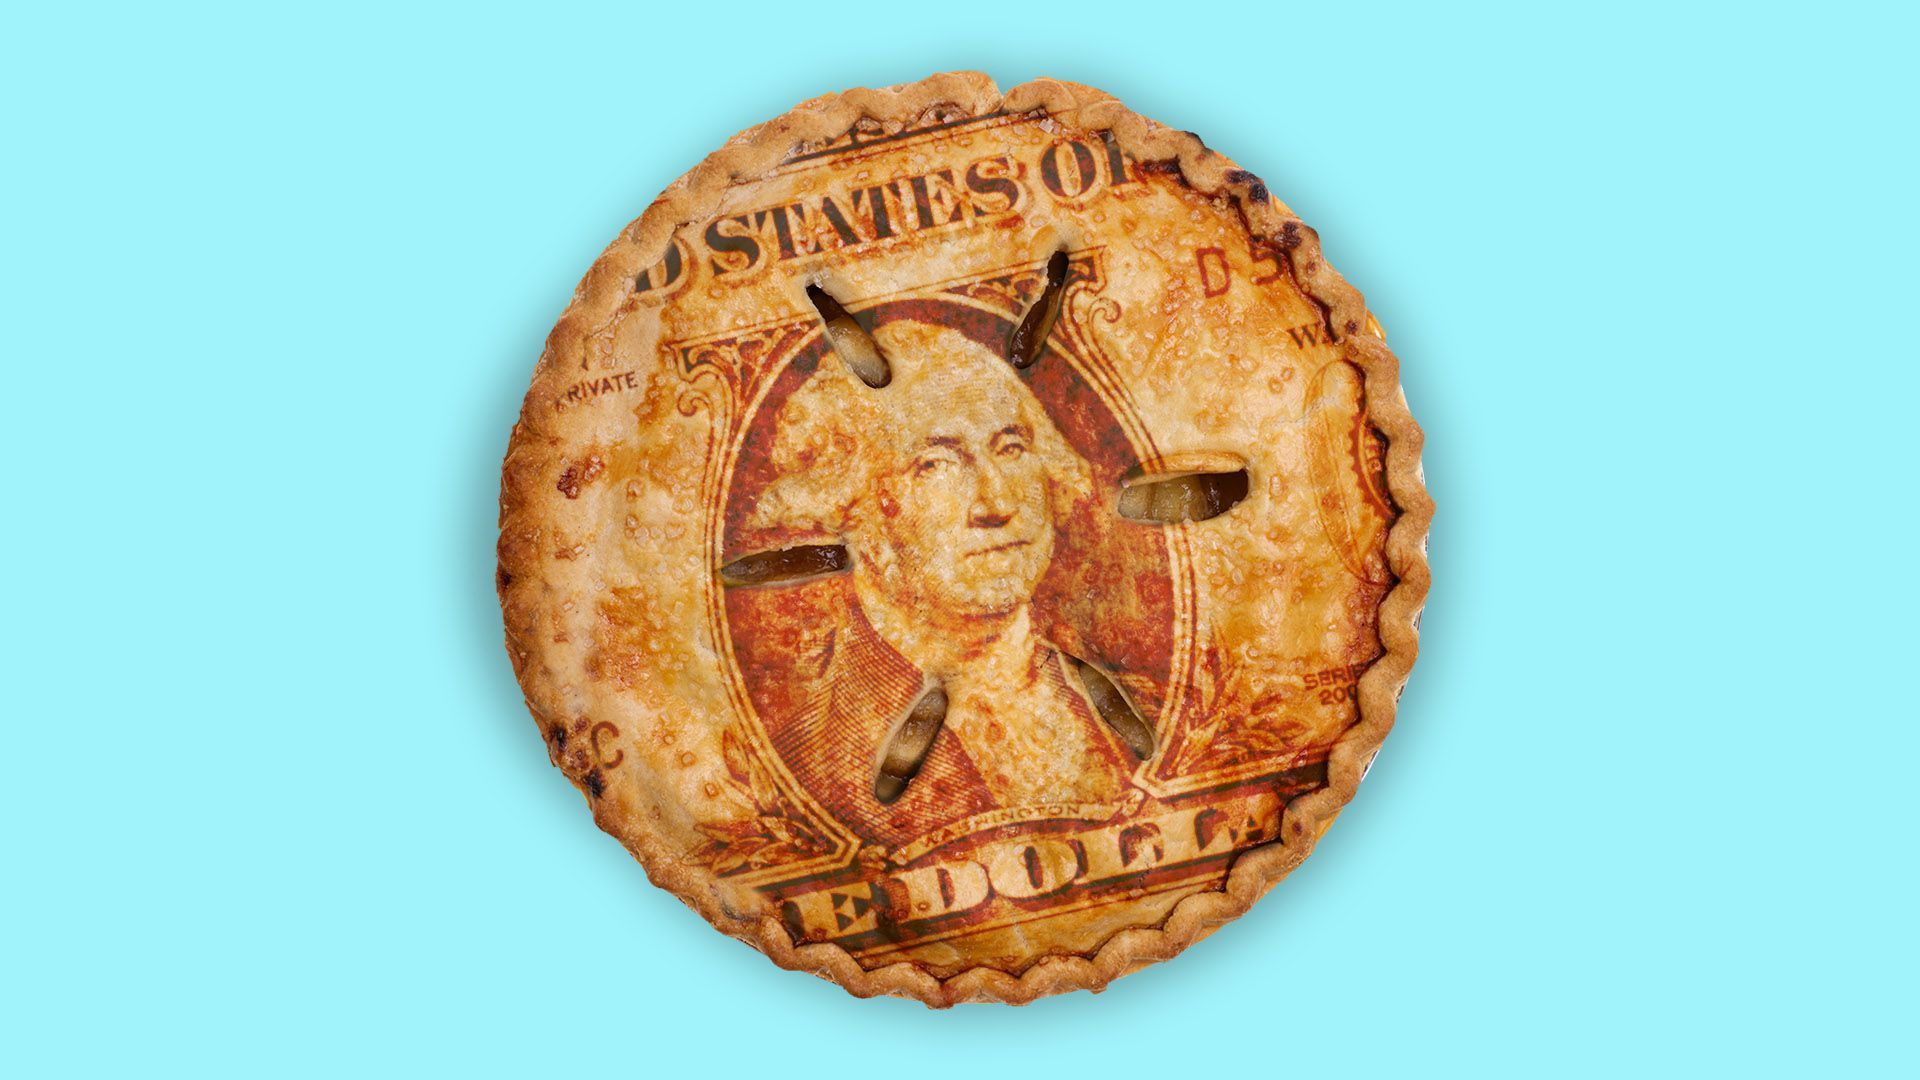 Illustration of a pie with a dollar bill on the crust